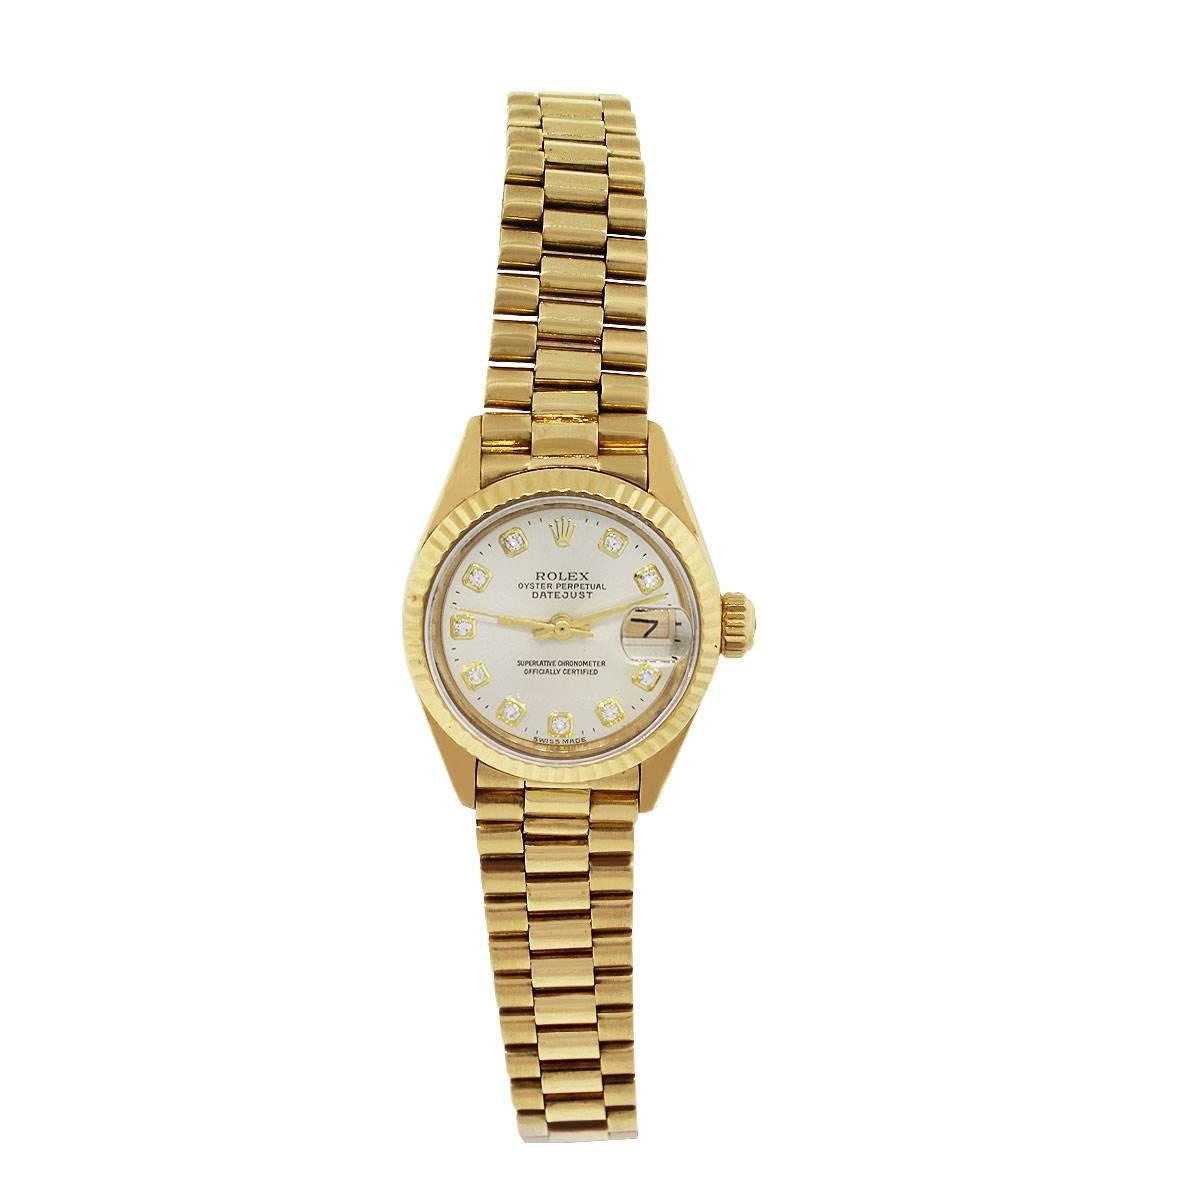 Brand: Rolex
MPN: 6916
Model: Datejust
Case Material: 18k Yellow Gold
Crystal: Sapphire
Case Diameter: 26mm
Bezel: Fixed Fluted bezel
Dial: Champagne Dial with Diamond markers. Date at 3 o’clock 
Bracelet :18k Presidential band
Size: Will fit a 6″